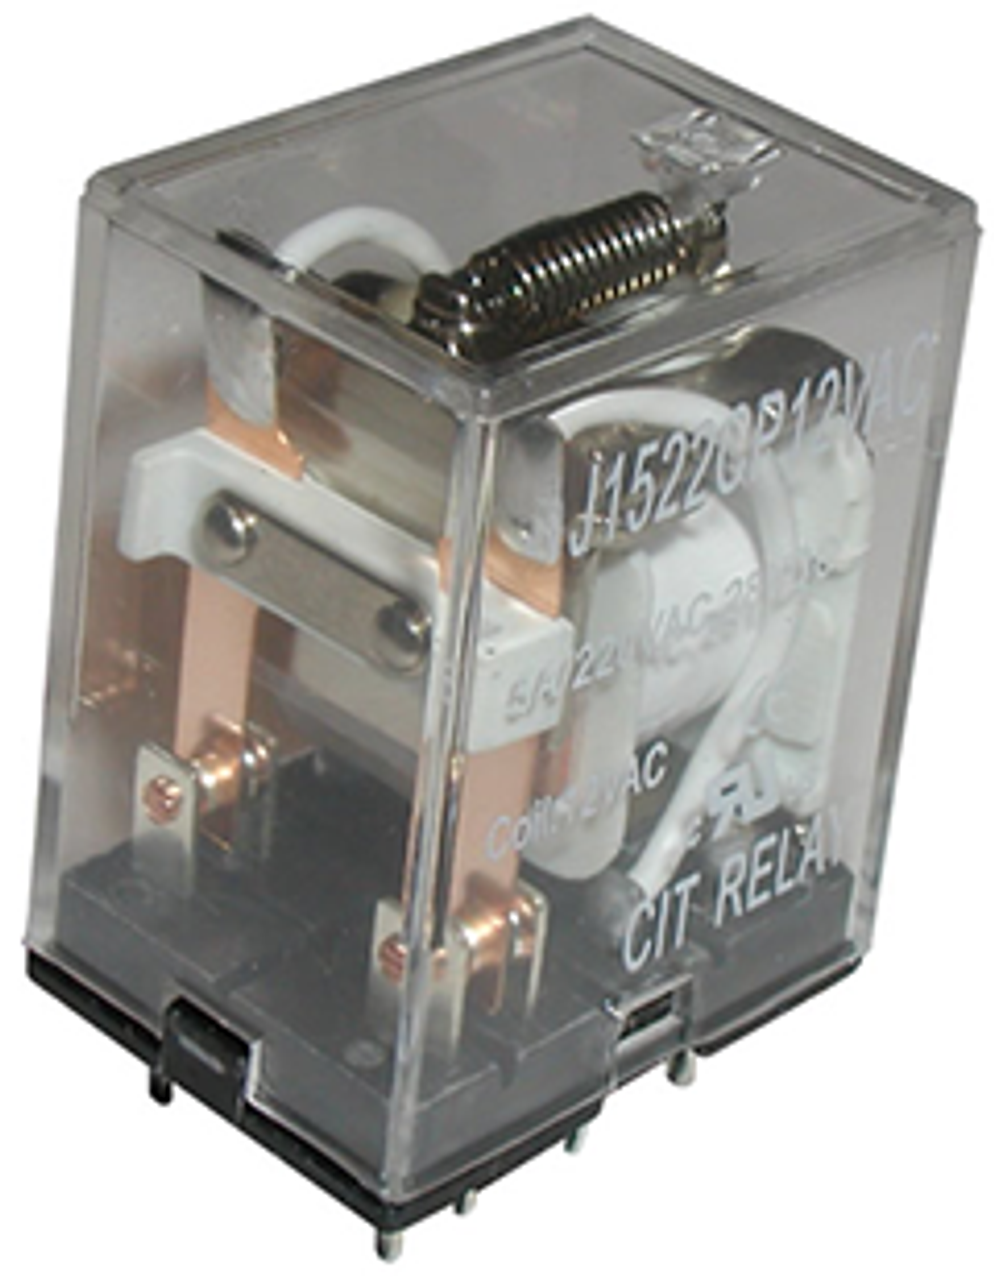 CIT Relay and Switch J1522CT24VDC Industrial Relays